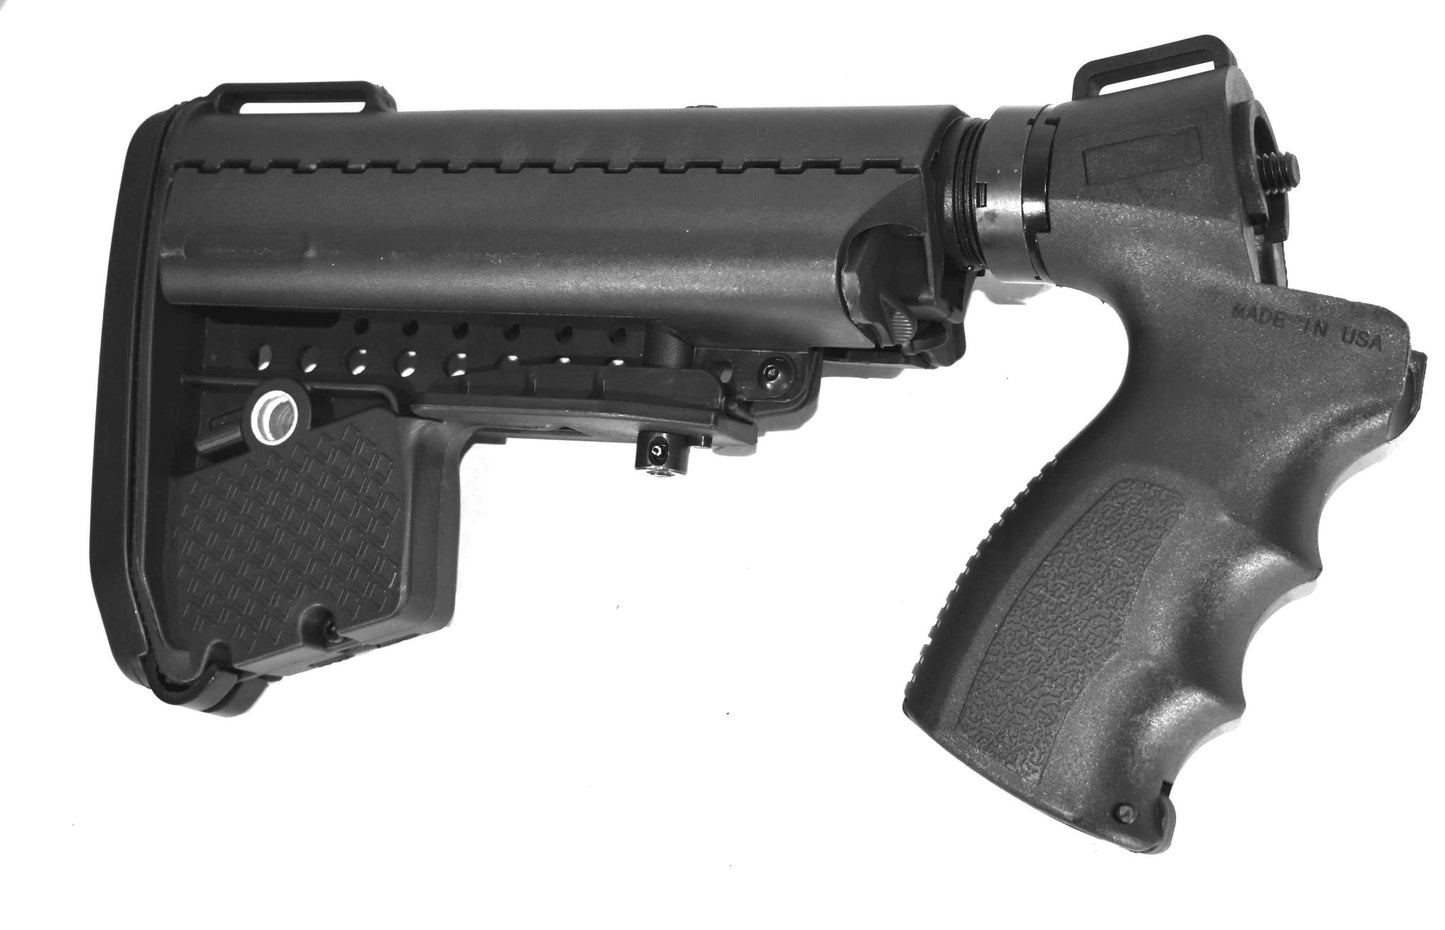 Mossberg 500A 12 gauge shotgun collapsible stock - TRINITY SUPPLY INC